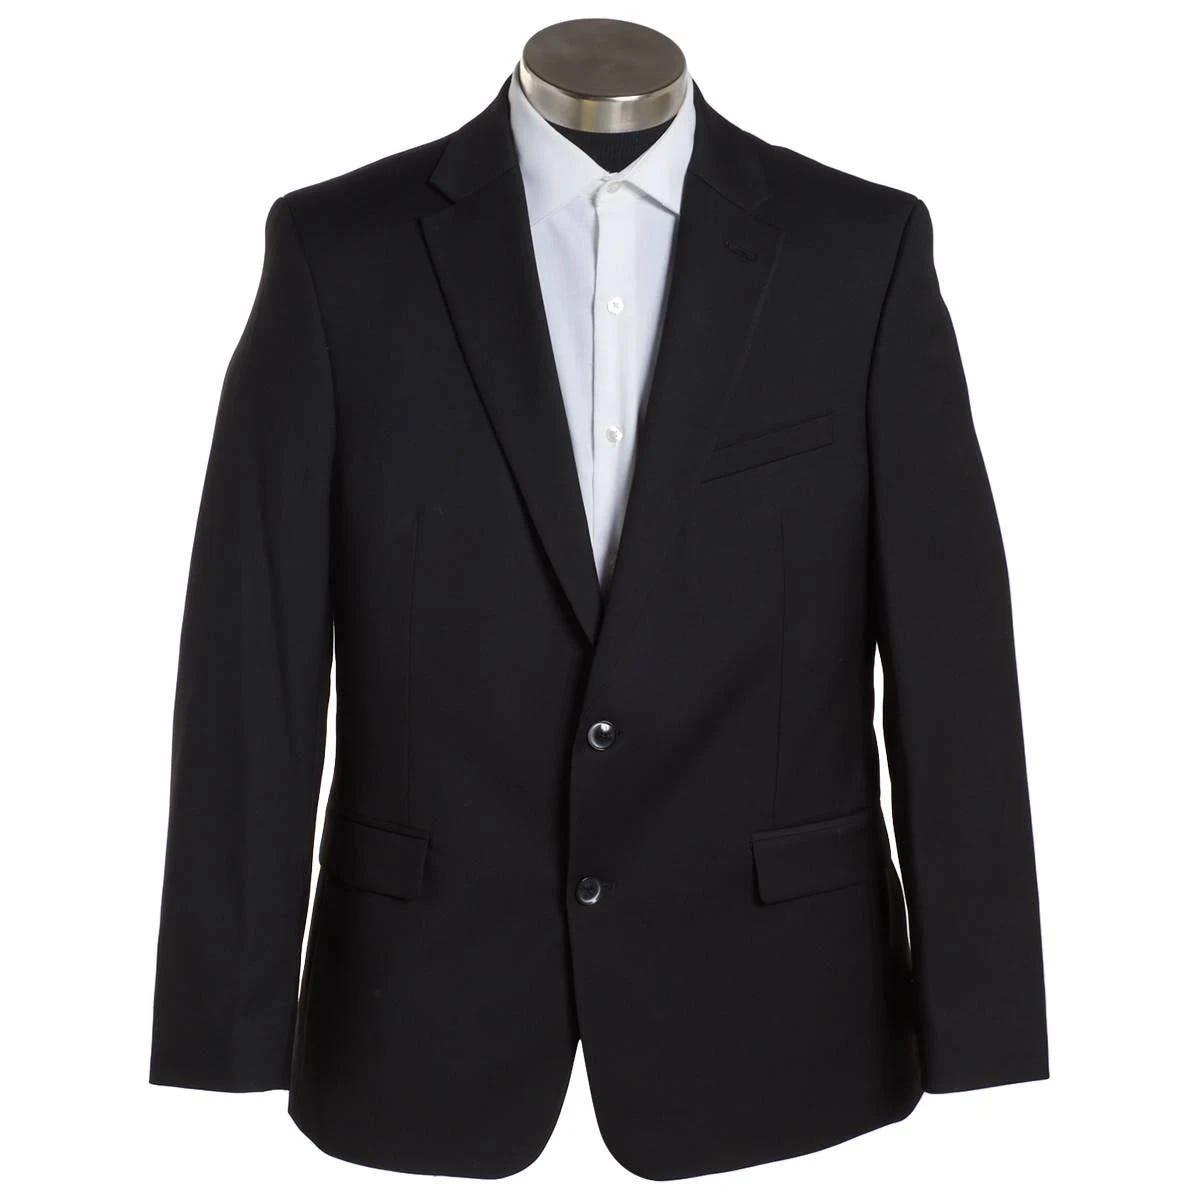 Slim-Fit Black Suit Jacket by Van Heusen for Comfort and Style | Image